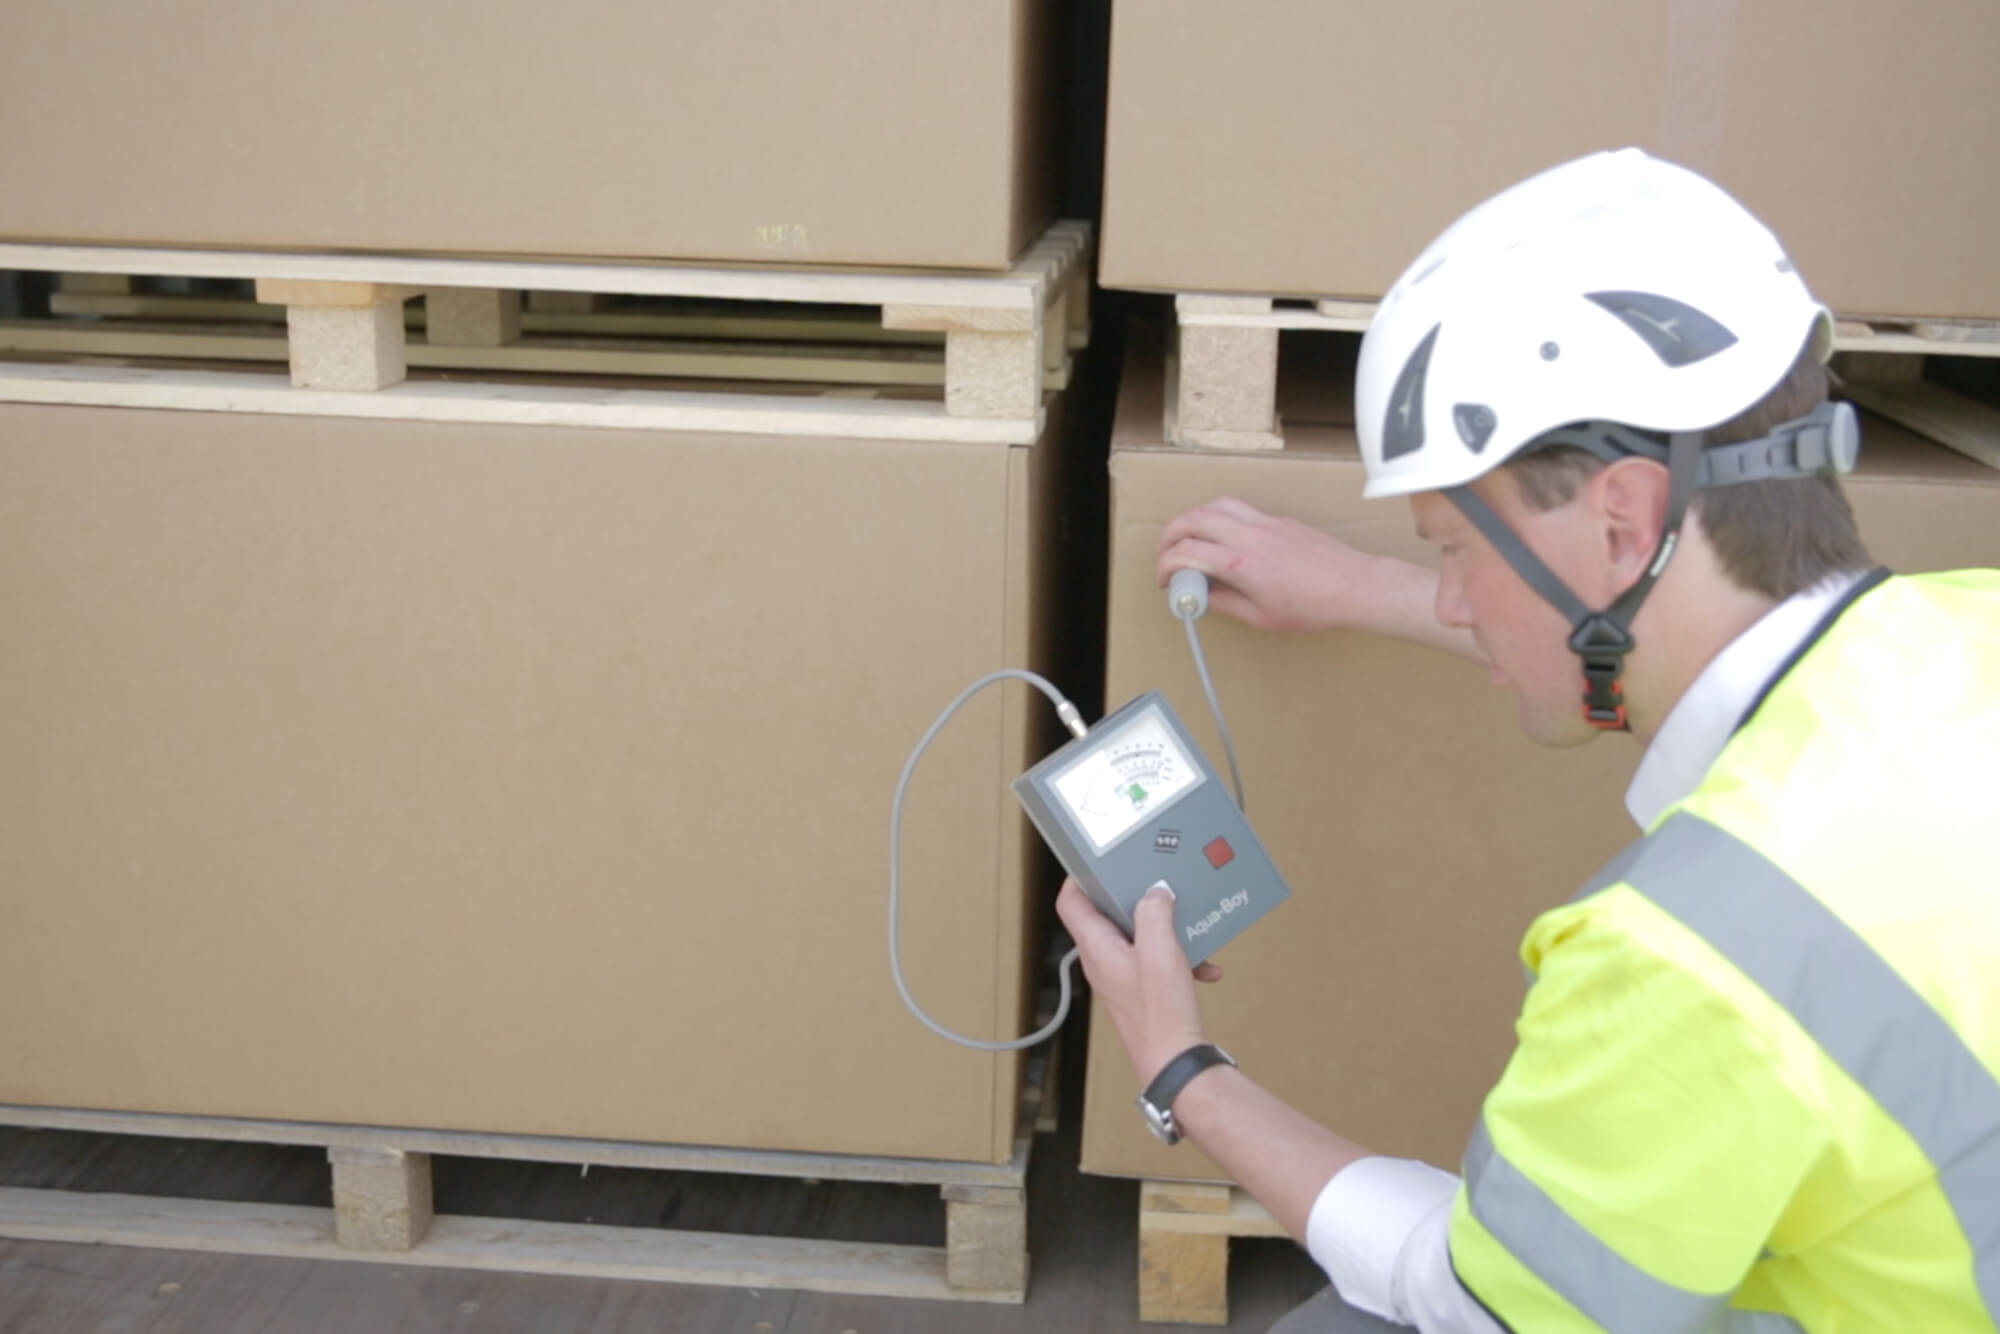 Man with a moisture measuring equipment analyzing some boxes